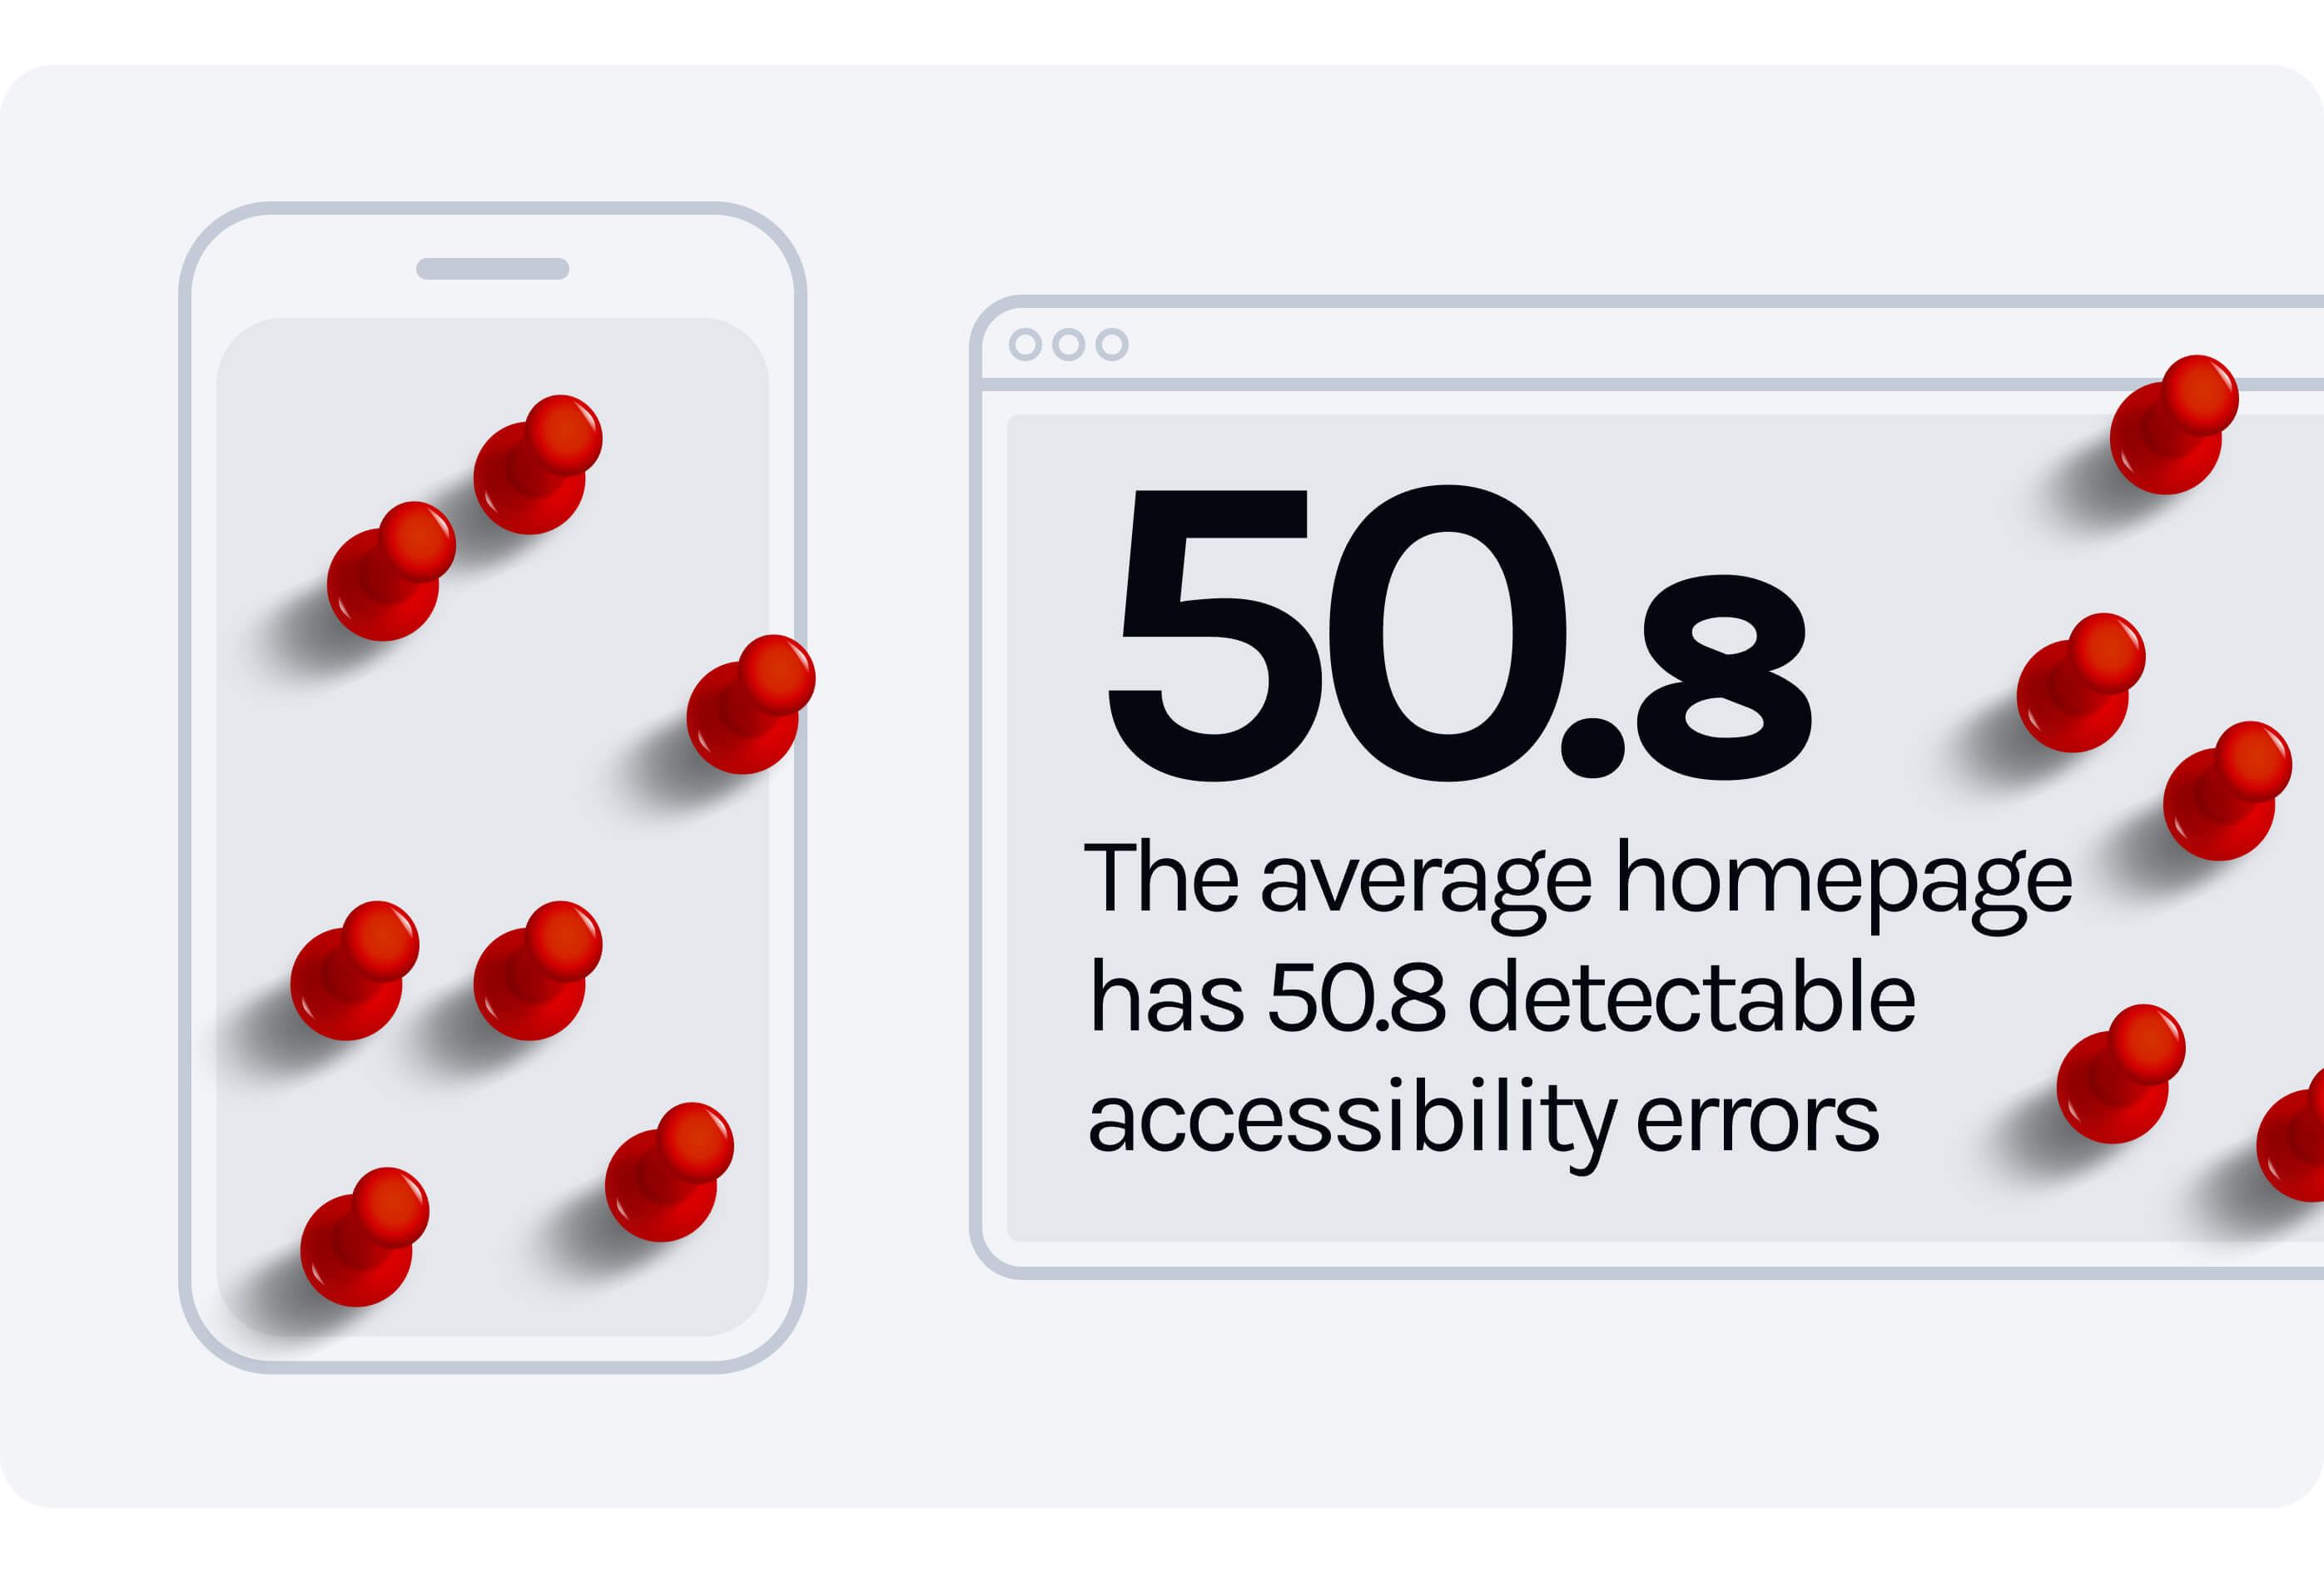 The average homepage has 50.8 detectable accessibility errors